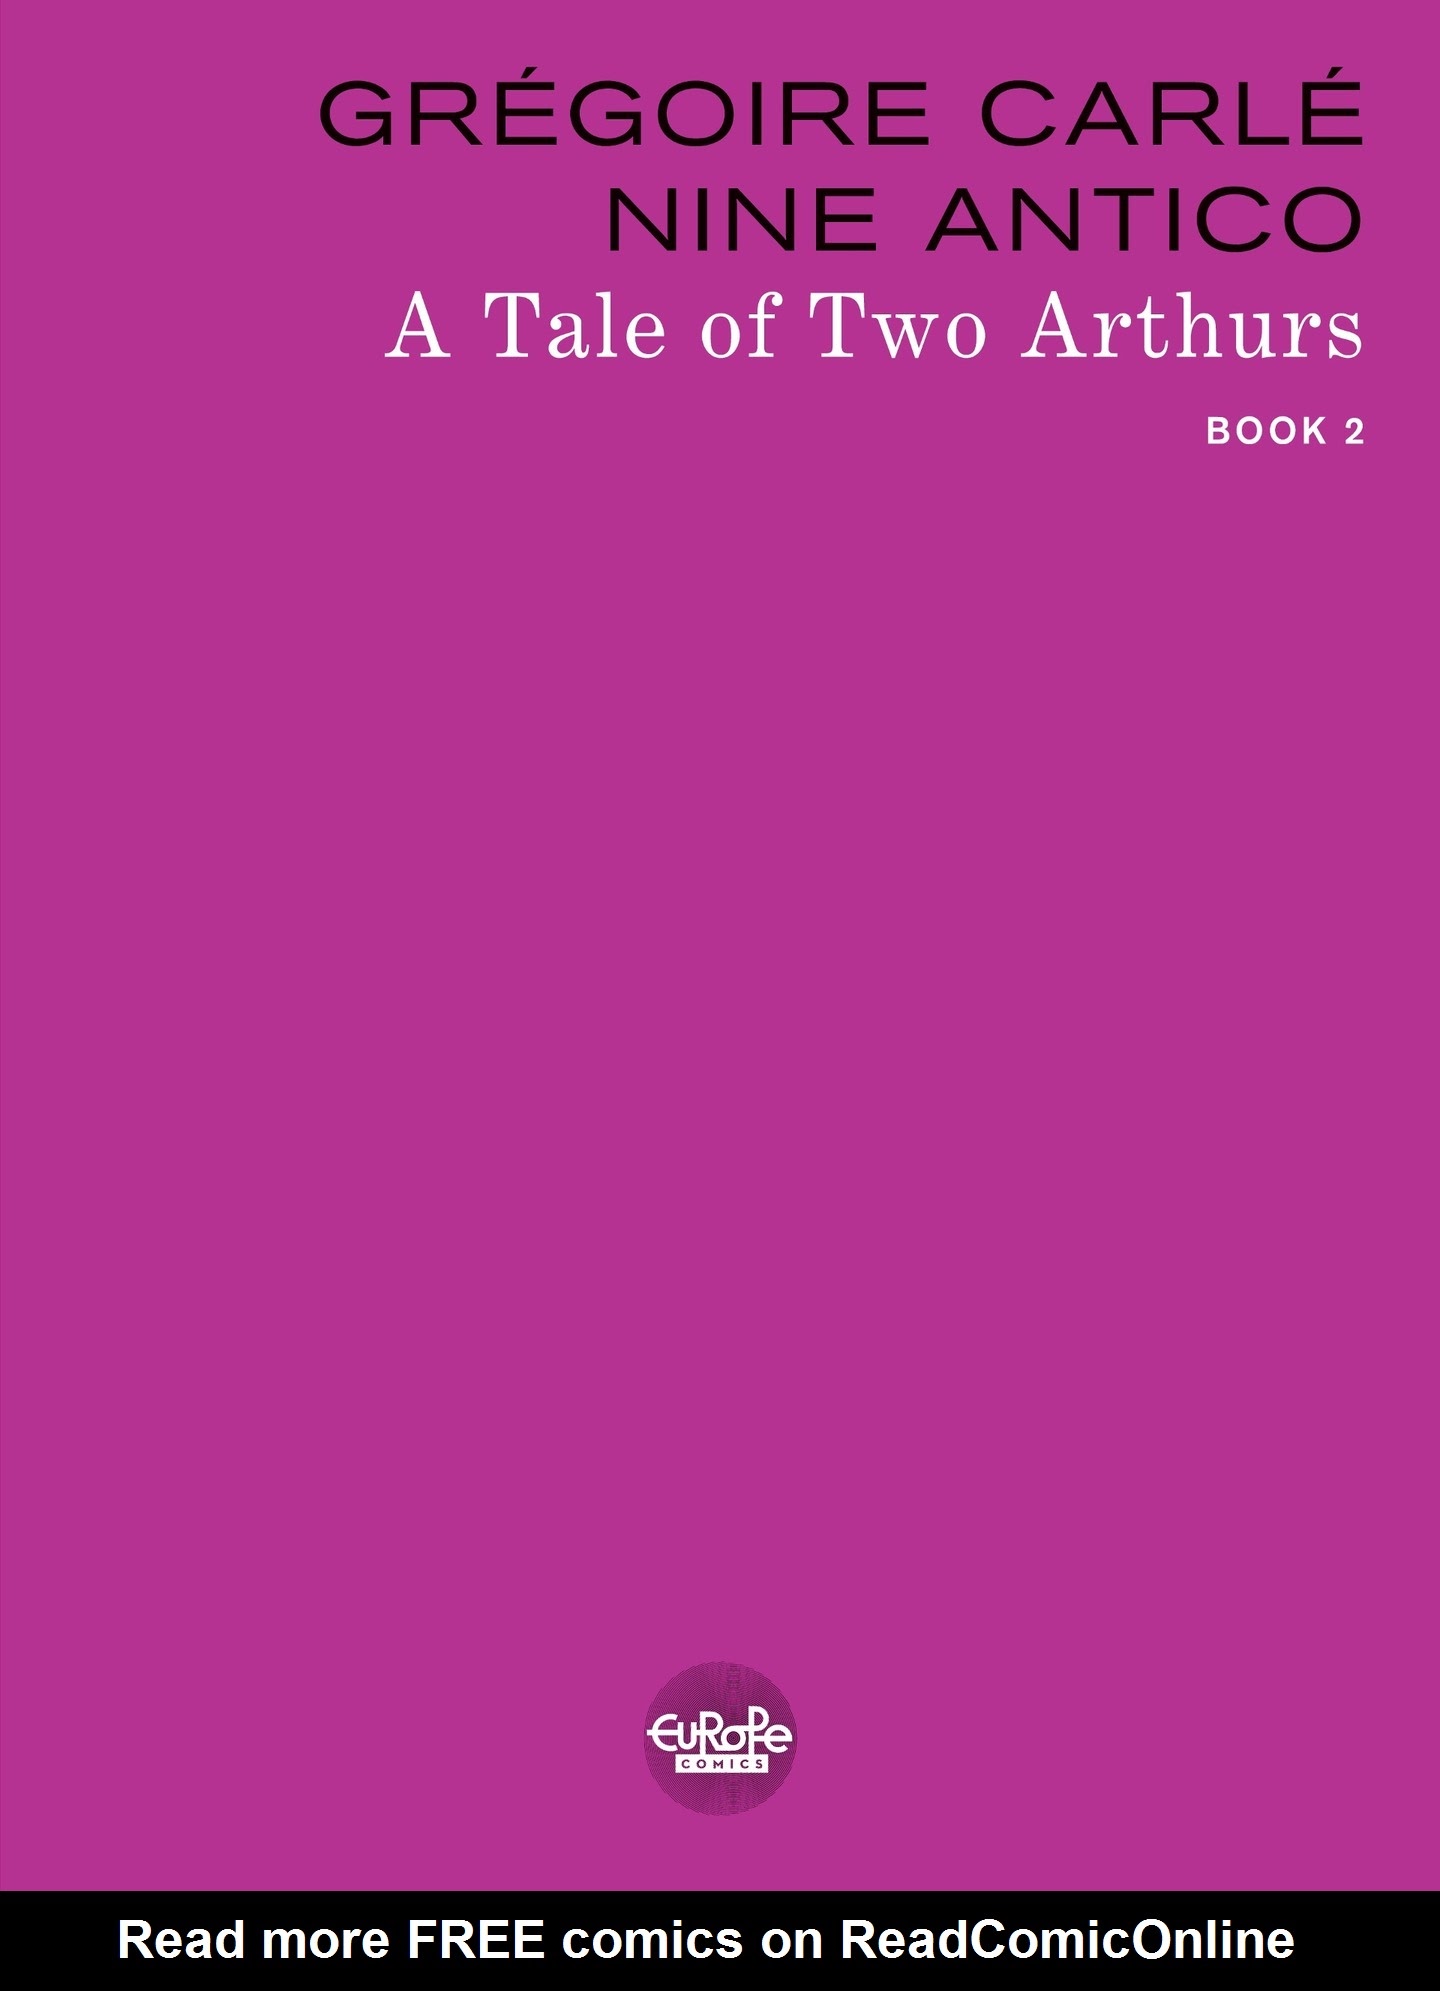 Read online A Tale of Two Arthurs comic -  Issue # TPB 2 - 2